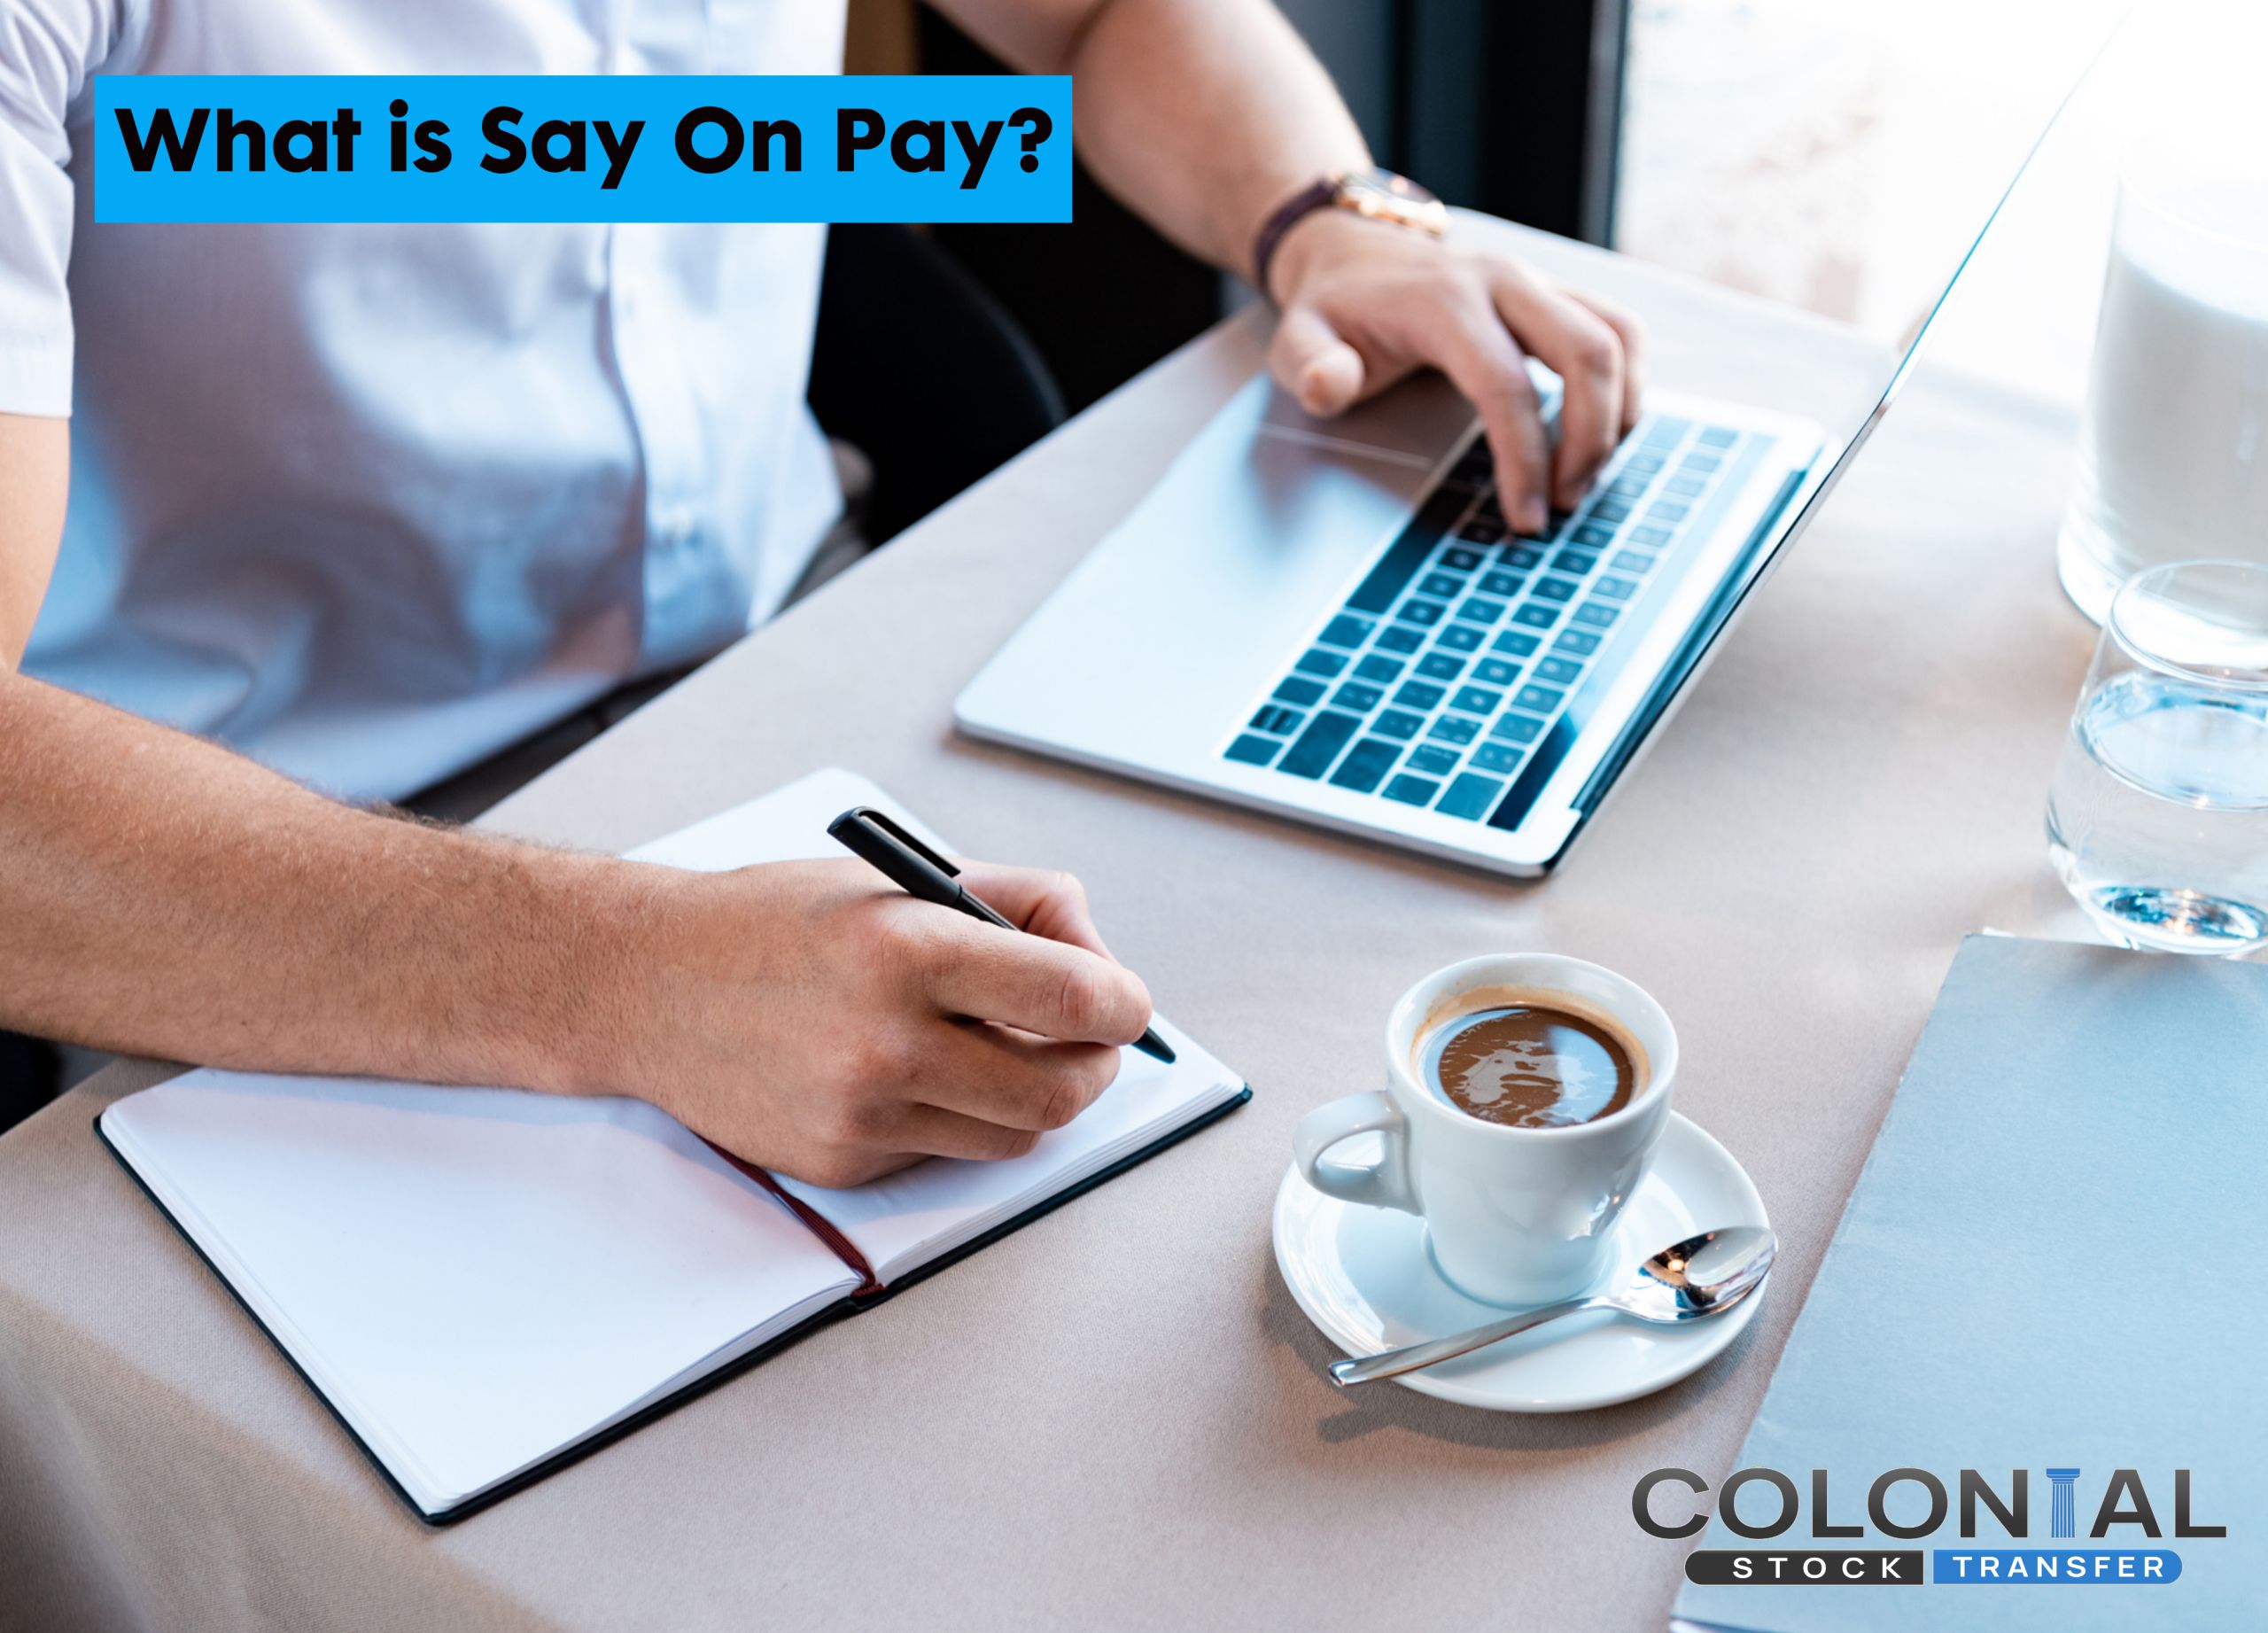 What is Say On Pay?